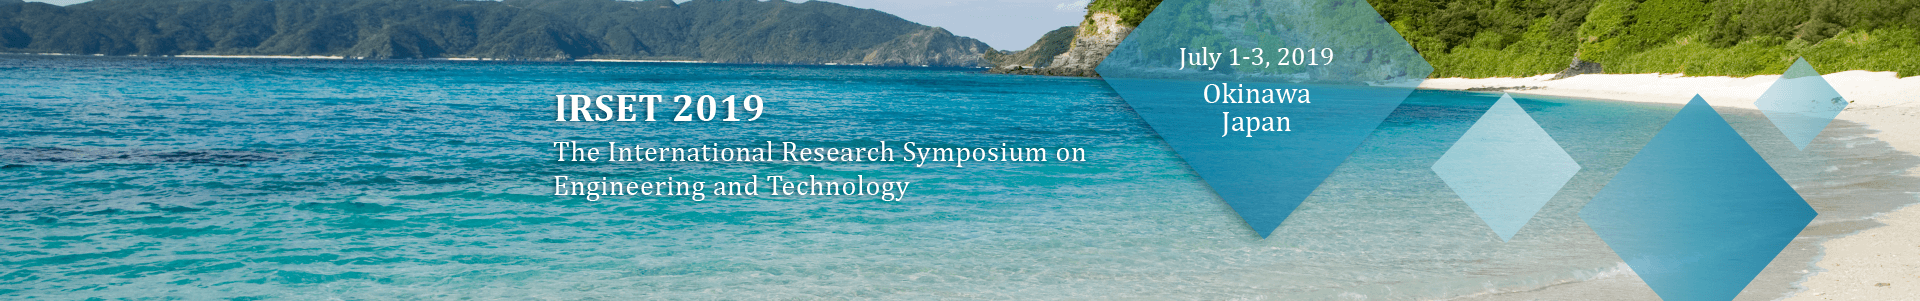 2019 IRSET The International Research Symposium on Engineering and Technology, Okinawa, Japan